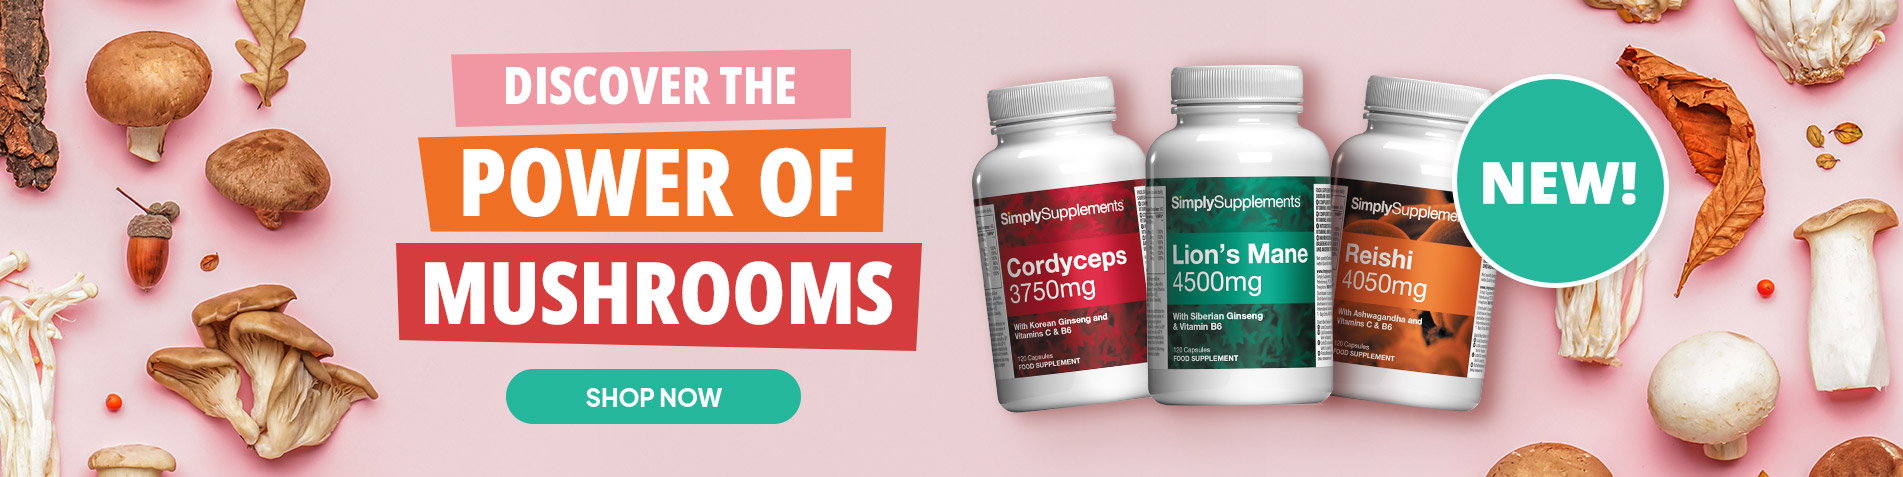 Discover the Power of Mushrooms - Shop now